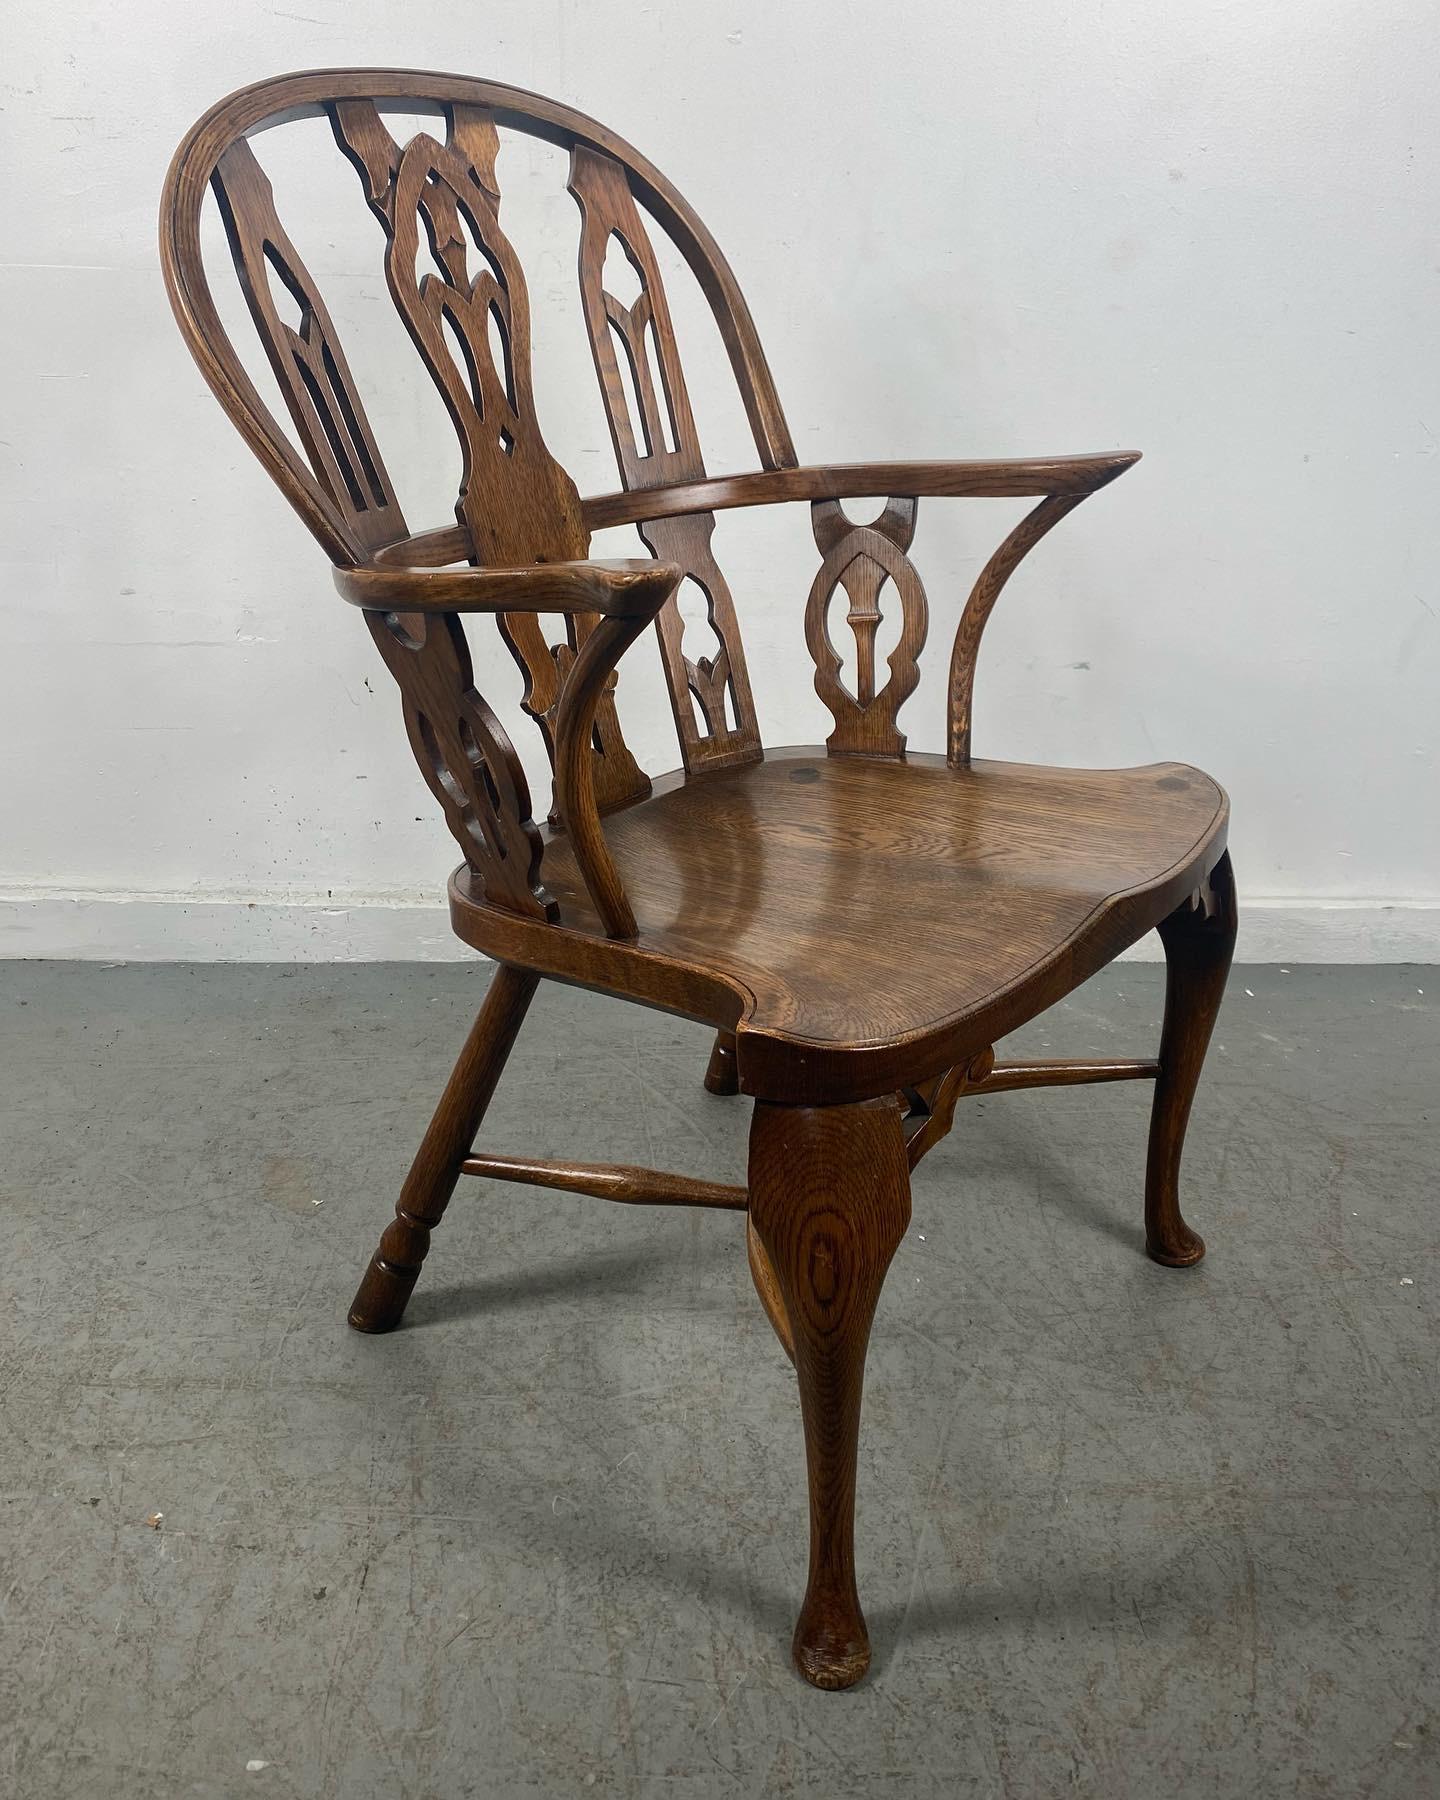 Hepplewhite Antique 19th Century Thames Valley English Gothic Windsor Chair For Sale